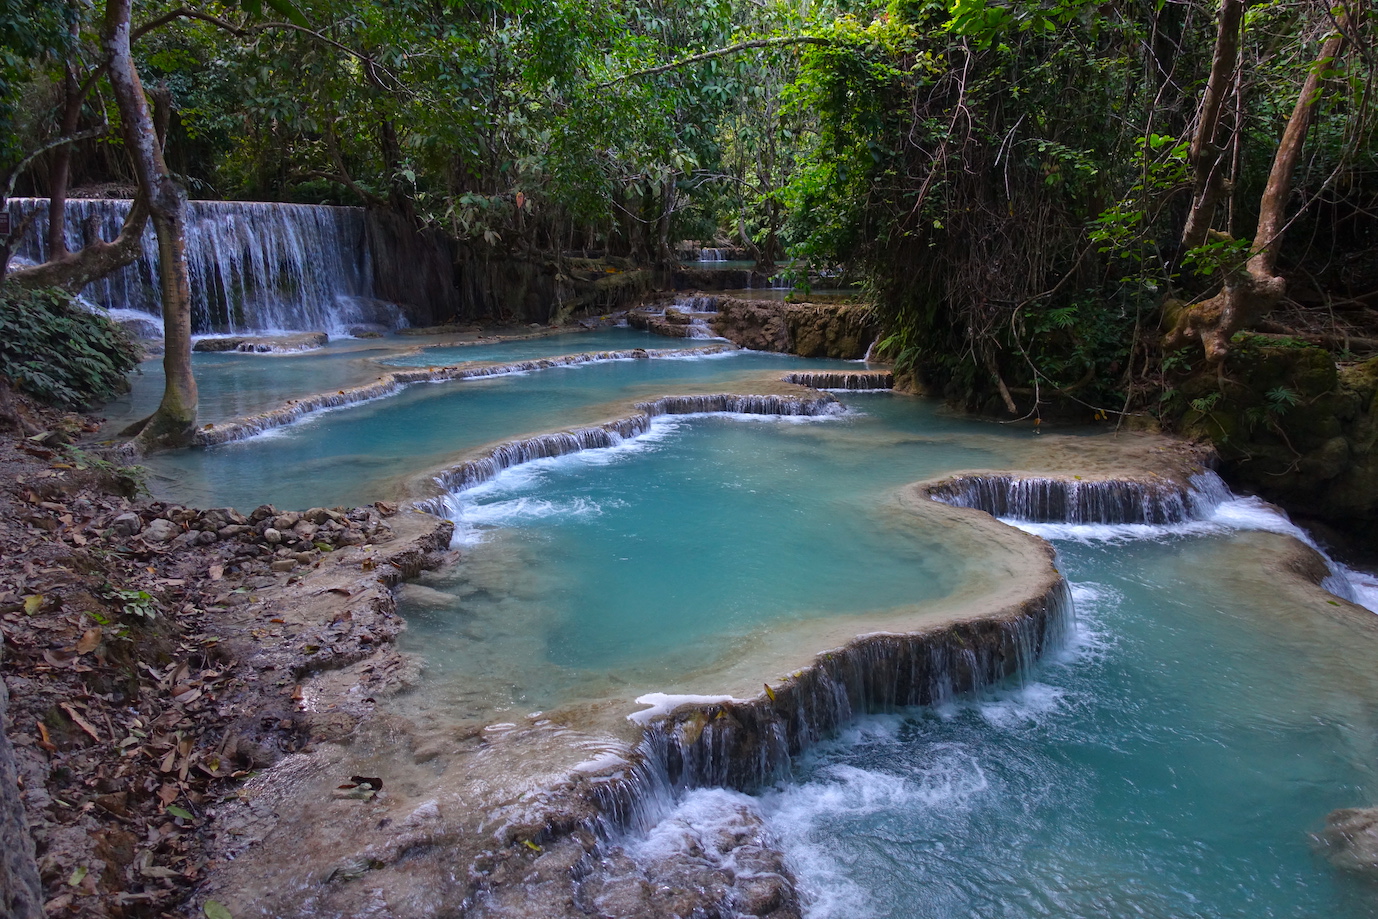 Pools at sunset time in the Kuang si waterfalls